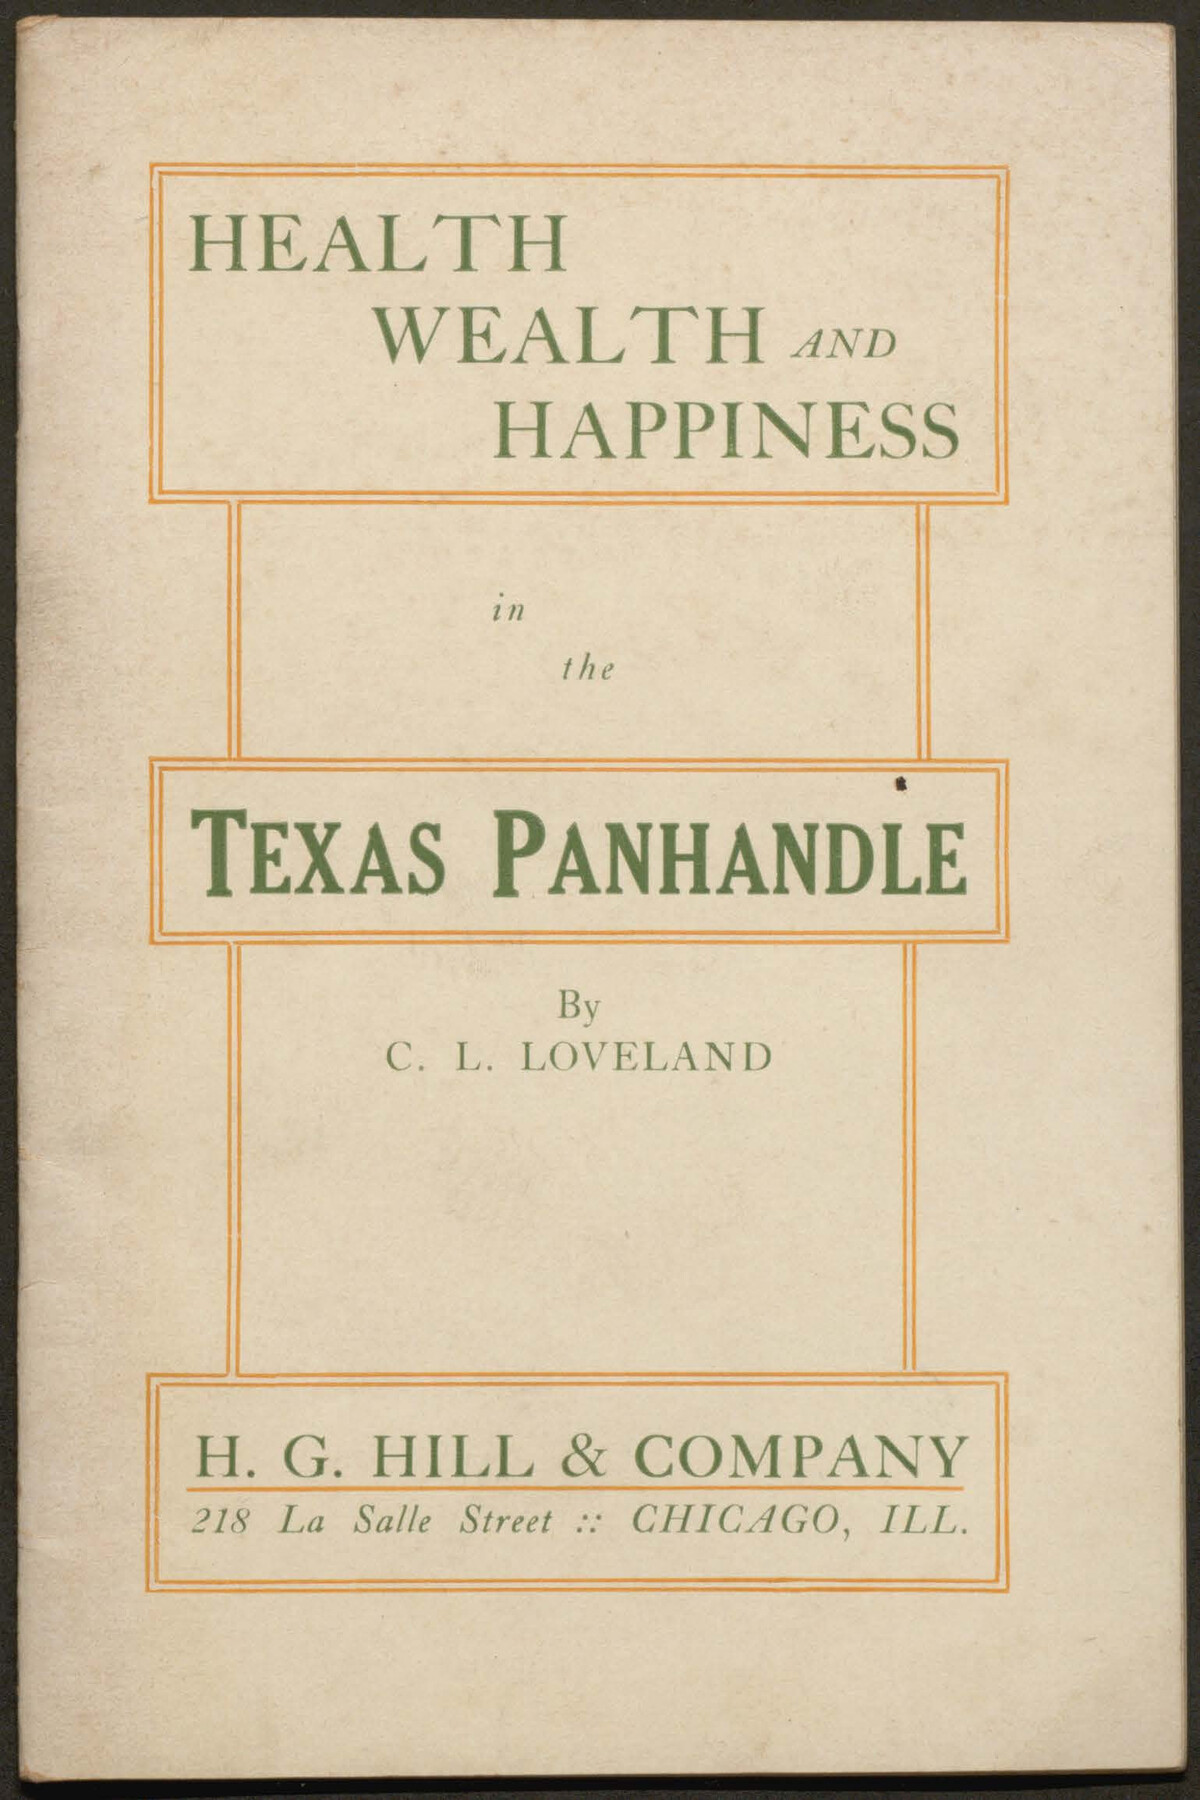 Health Wealth and Happiness in the Texas Panhandle